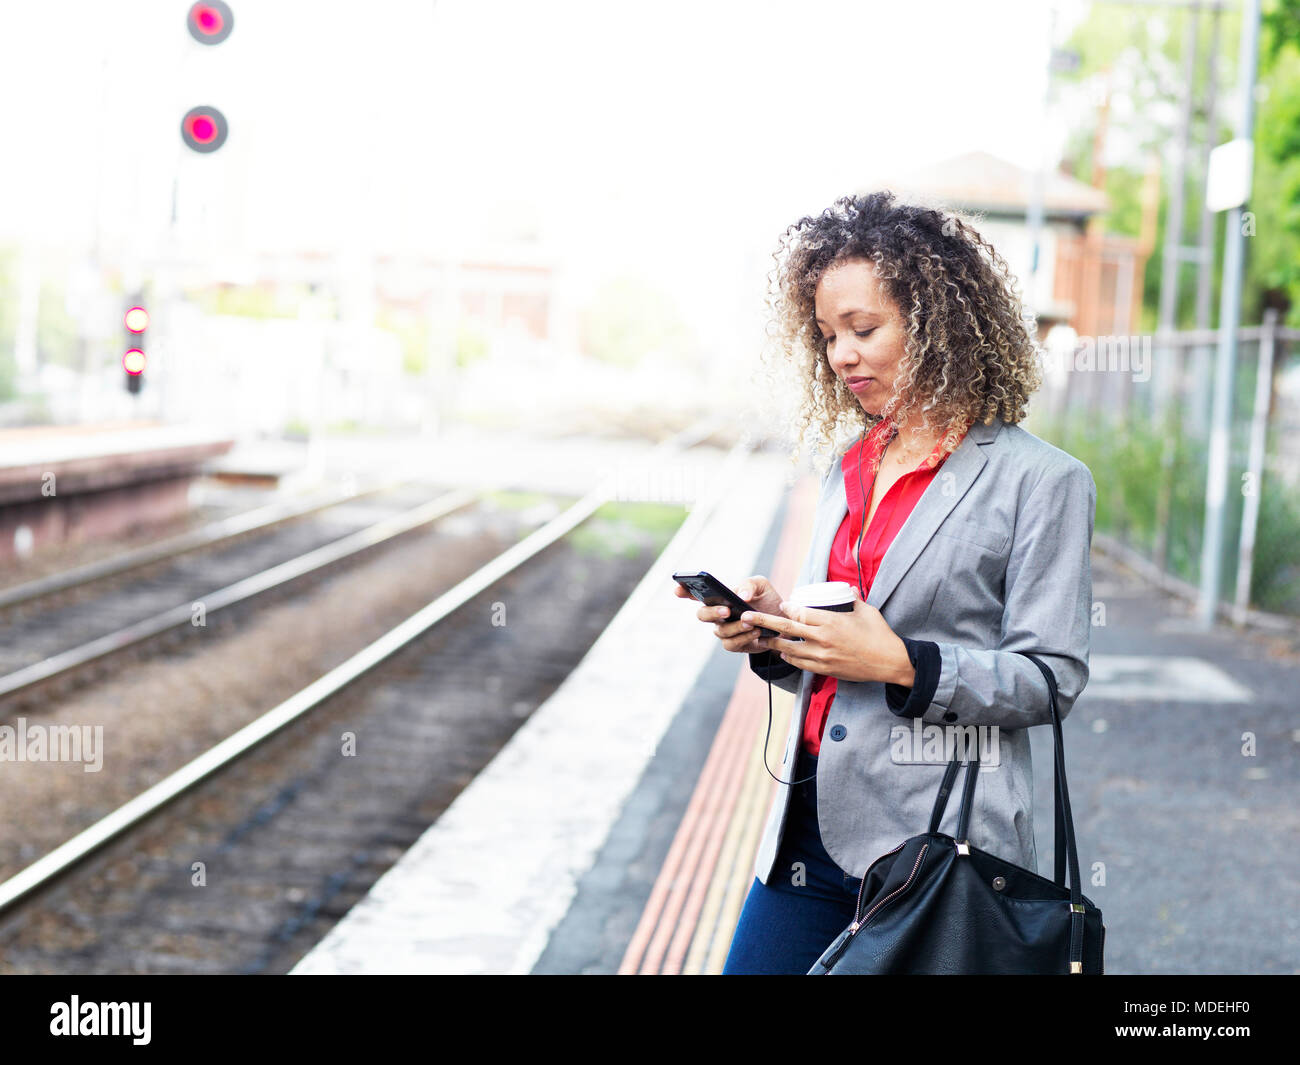 Mid adult woman standing on train platform, using smartphone, holding disposable coffee cup Stock Photo